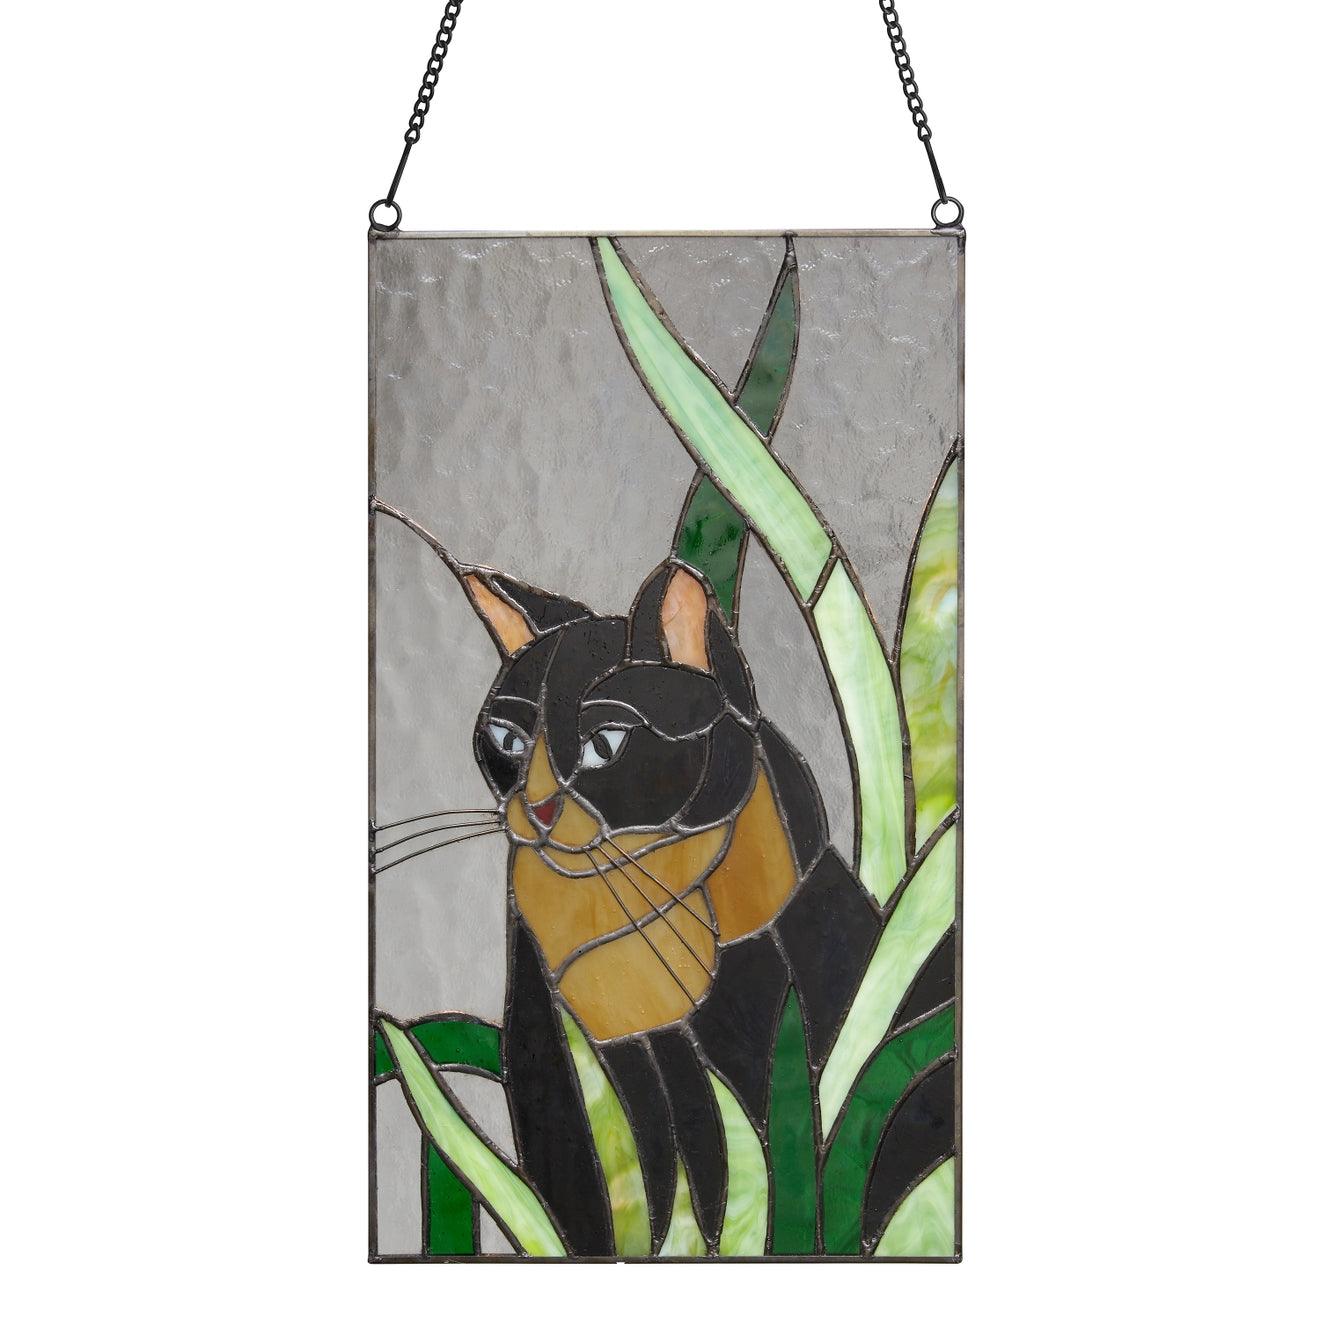 Tuxedo Cat Stained Glass Window Panel - A clear stained glass panel featuring a charming fat tuxedo cat design